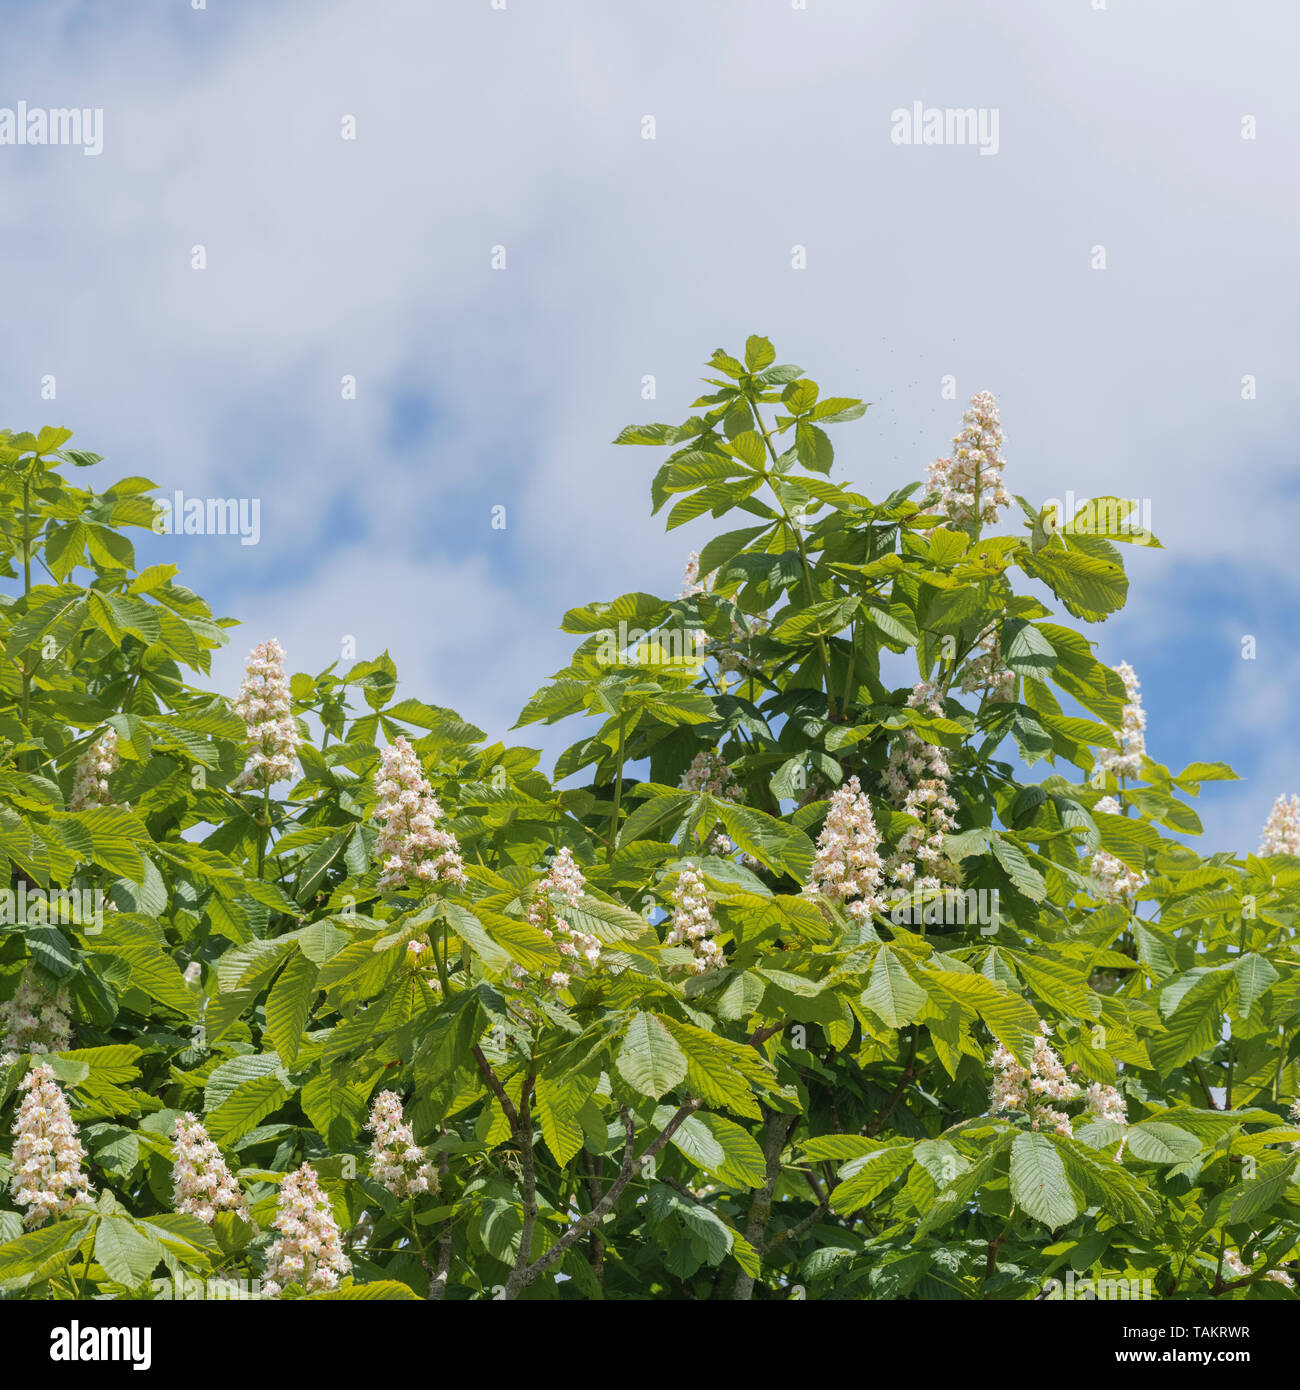 Flowering Horse Chestnut / Aesculus hippocastanum in Spring sunshine, set against blue sky. Once used as a medicinal plant in herbal remedies. Stock Photo